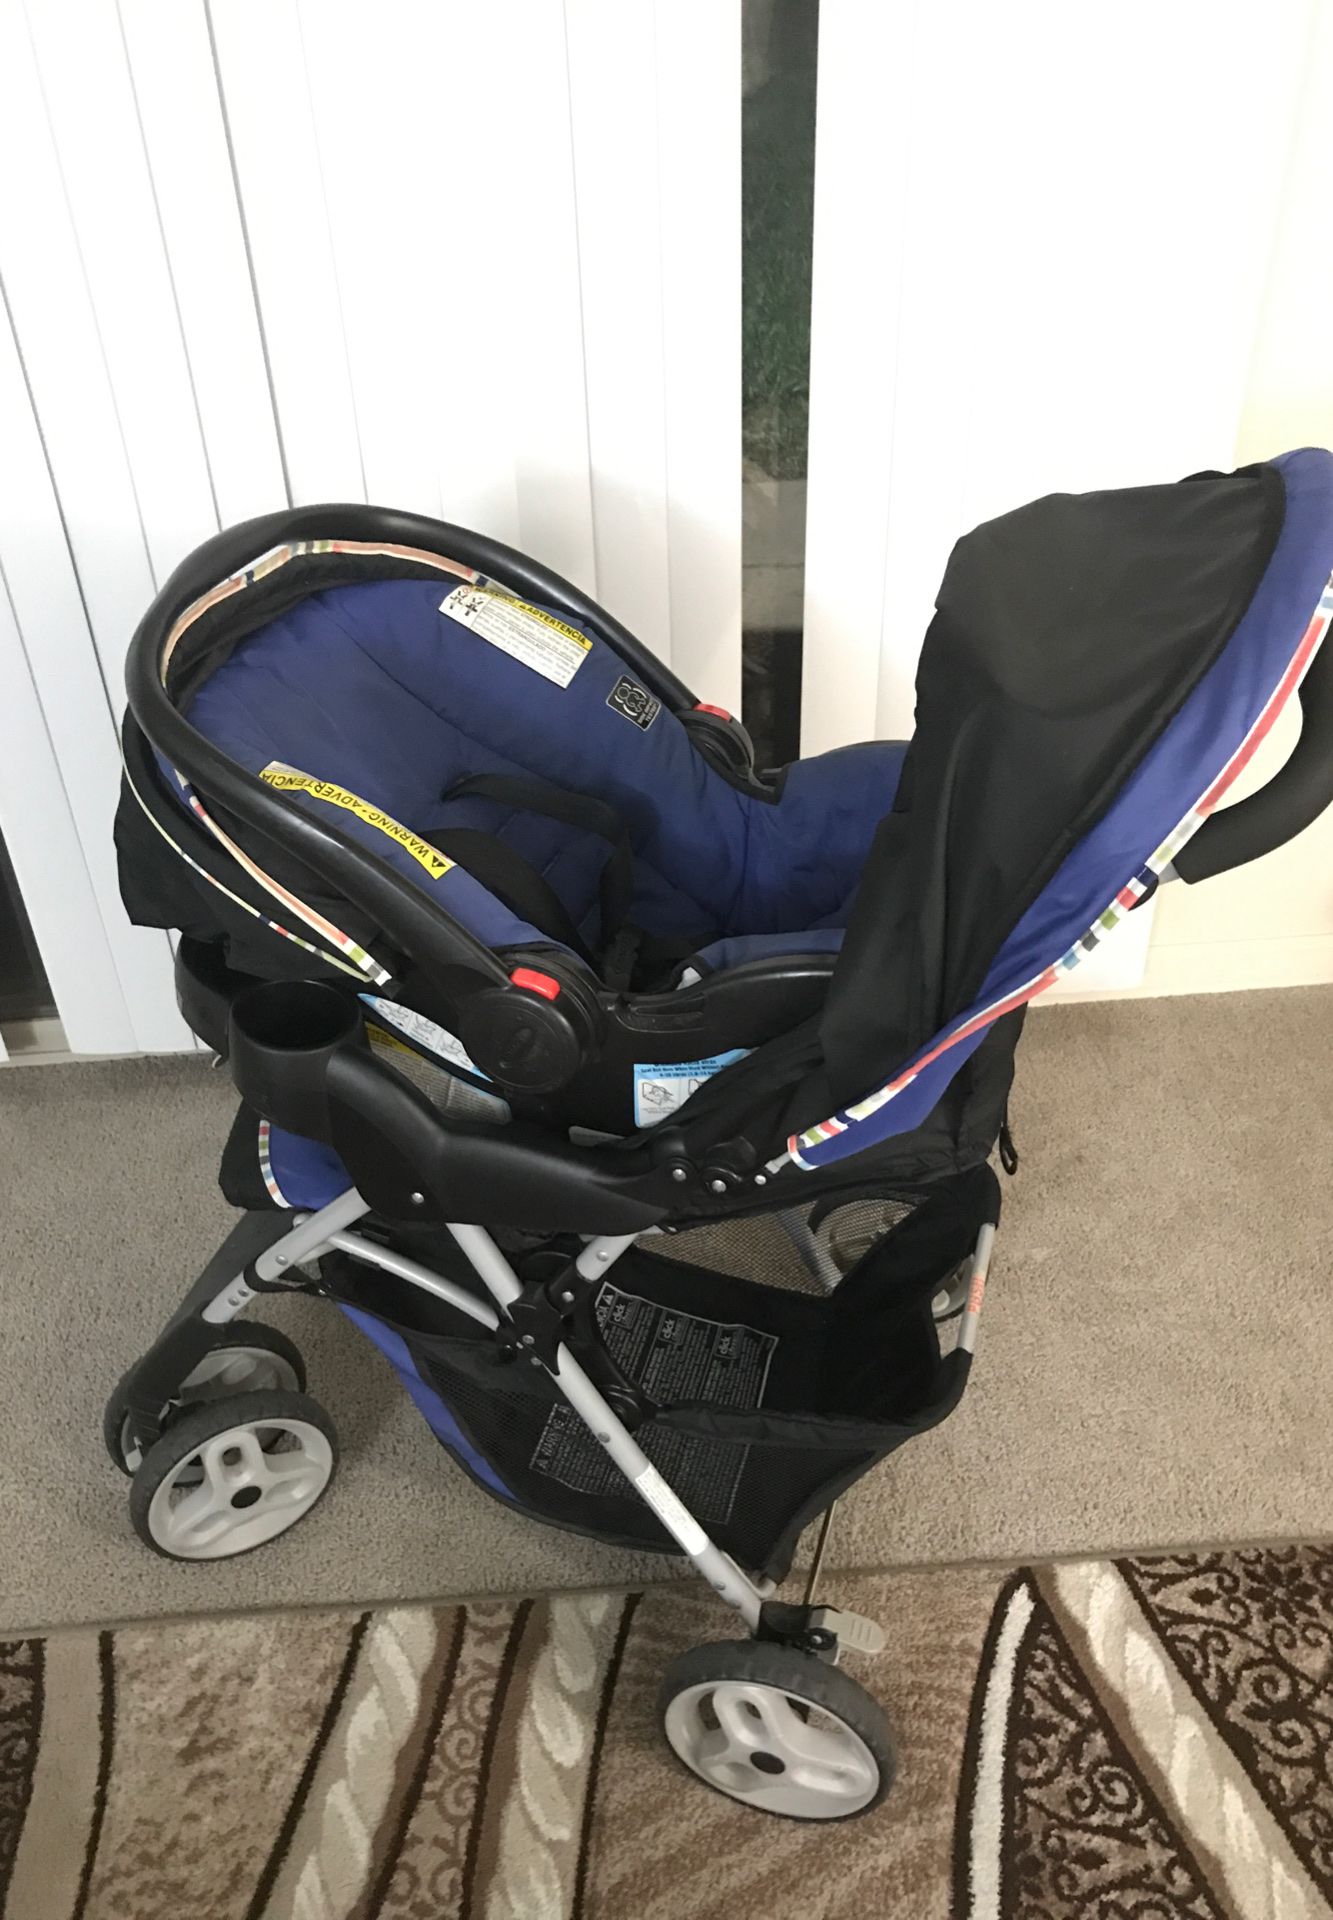 Graco Comfy Cruiser Click Connect Stroller Travel System, with SnugRide ClickConnect 30 Infant Car Seat with base